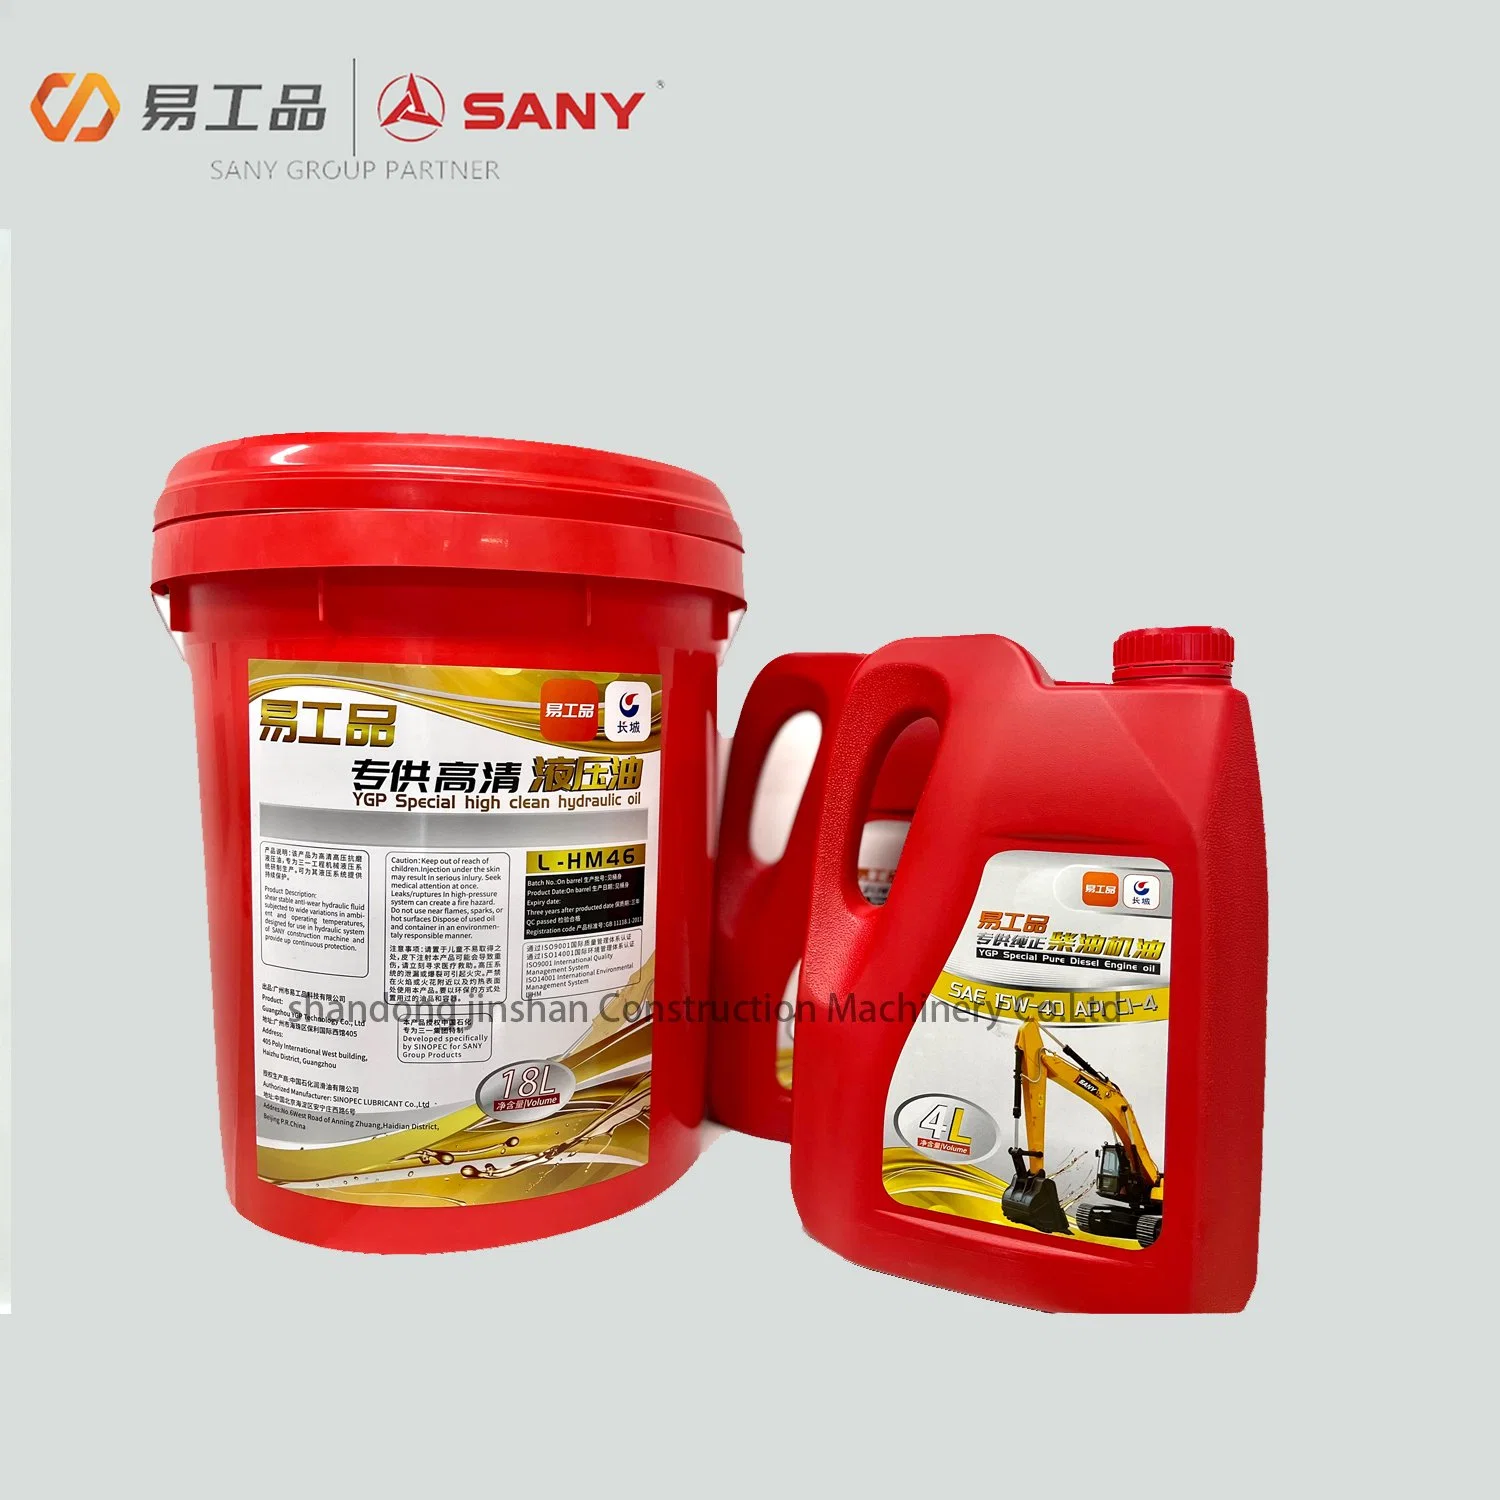 Construction Machinery Accessories Are Suitable for Sy Excavator Wheel Digging Sy155 Diesel Crude Filter Elements